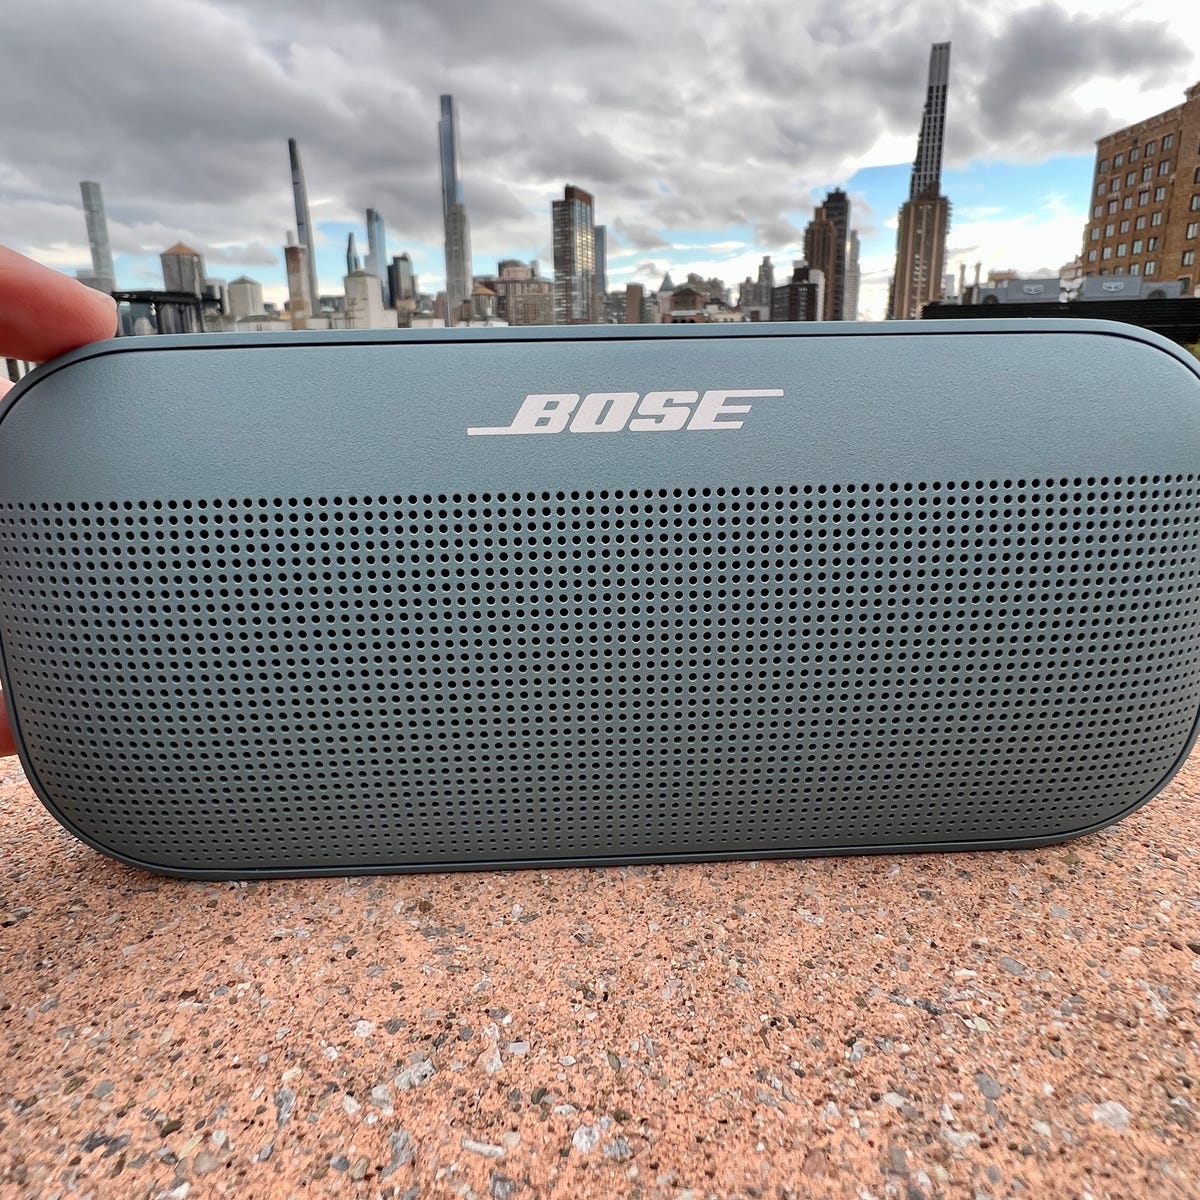 Bose SoundLink Flex review: Best mini Bluetooth speaker you buy right now - CNET